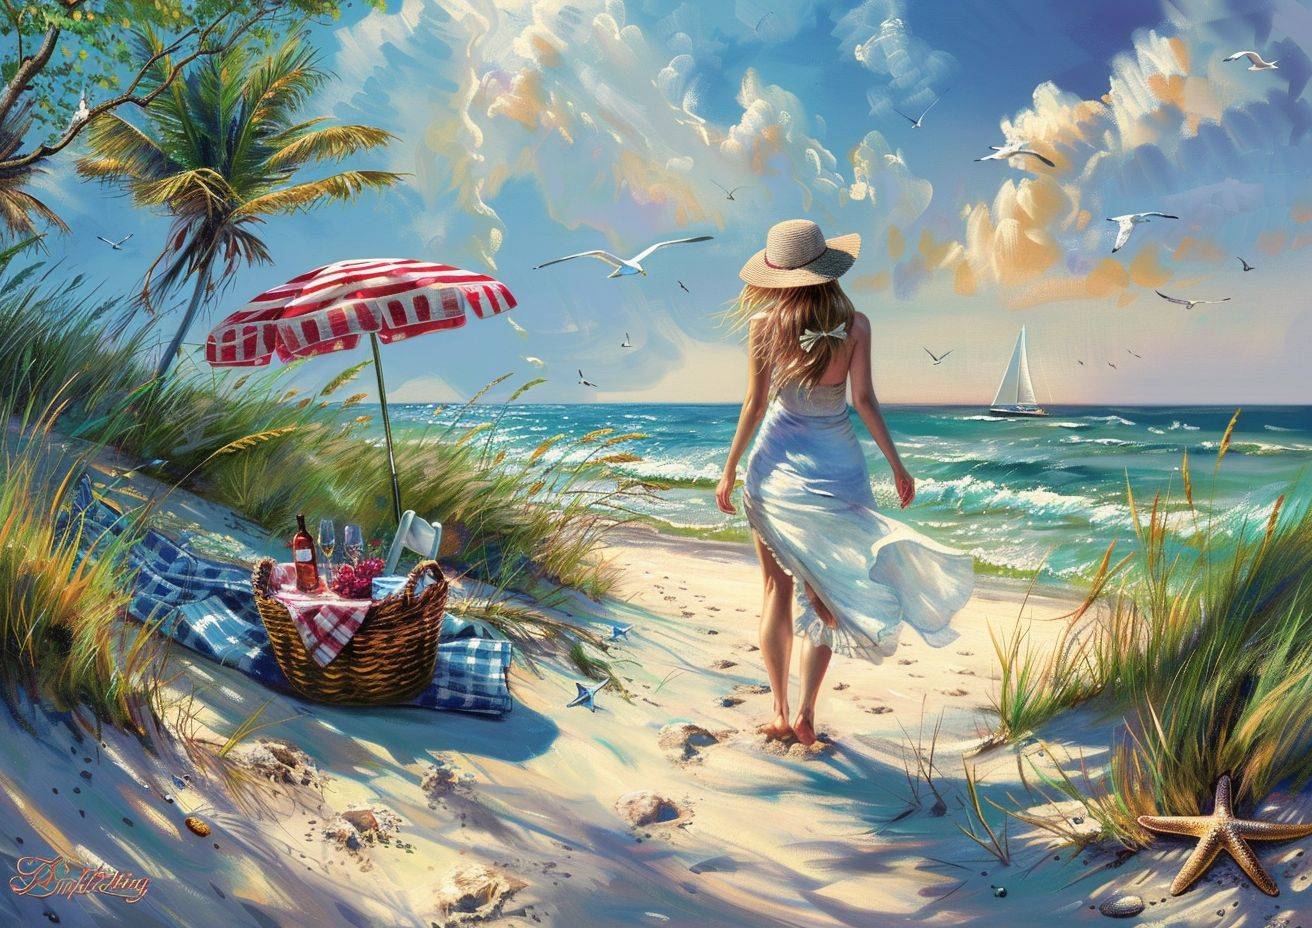 The main subject is an adult female, walking towards the shore, leaving footprints in the sand. She is dressed in a light summer dress, barefoot, with her hair caught in the breeze. She wears a sun hat, and is holding a book in one hand. Around her, seagulls fly overhead, with palm trees and dune grass dotting the shoreline. In the foreground, a red and white striped beach umbrella anchors firmly in the sand, providing shade next to a blue and white checkered blanket laid out with a picnic basket, plates, and a wine bottle visible. Nearby, a starfish lies in the sand. The background is dominated by the setting sun casting golden hues over the ocean, with a distant sailboat visible on the horizon. 👣 The composition is from a third-person view, slightly elevated, focusing on the woman walking and the trail of footprints she leaves behind. The lighting is soft and warm, emphasizing the golden hour and casting everything in warm tones of gold, blue, and green, with a focus on the textures of sand, water, and sky. The image is intended for high resolution fine art print, with a keen emphasis on the impressionist style's focus on light and color.